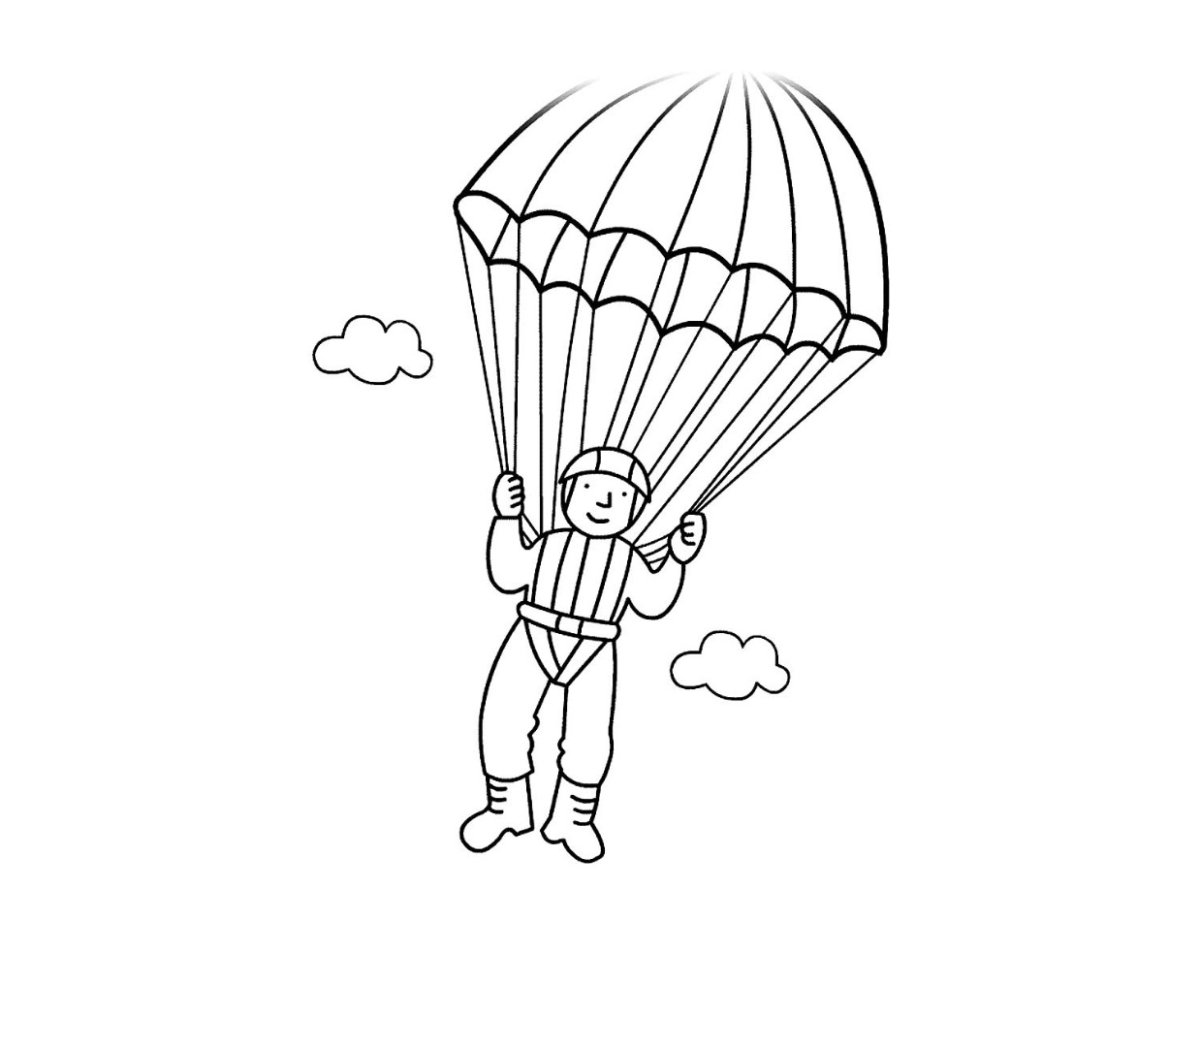 Great skydiver coloring page